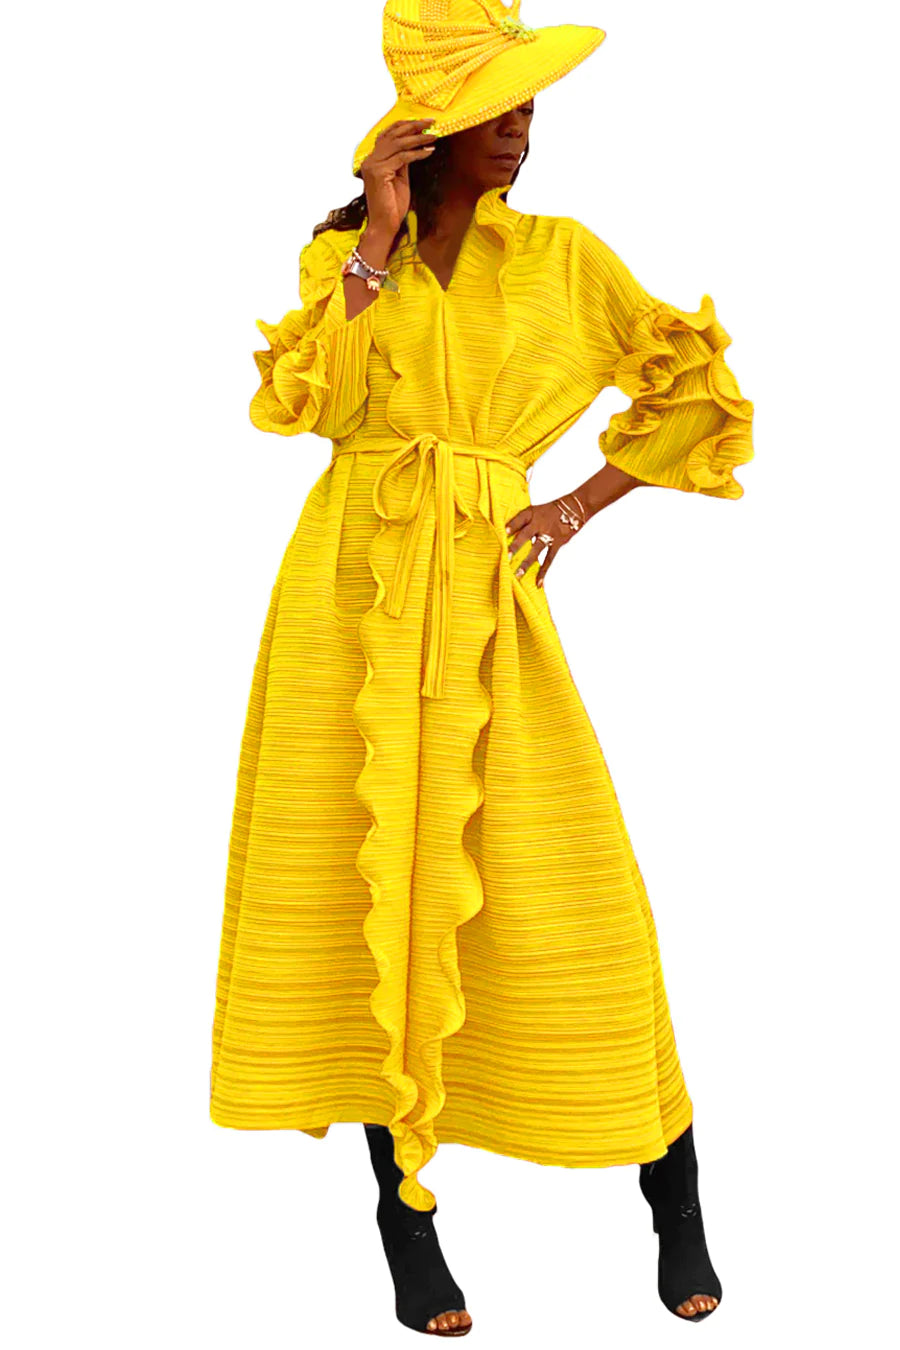 N By Nancy Dress X7335C-Yellow - Church Suits For Less